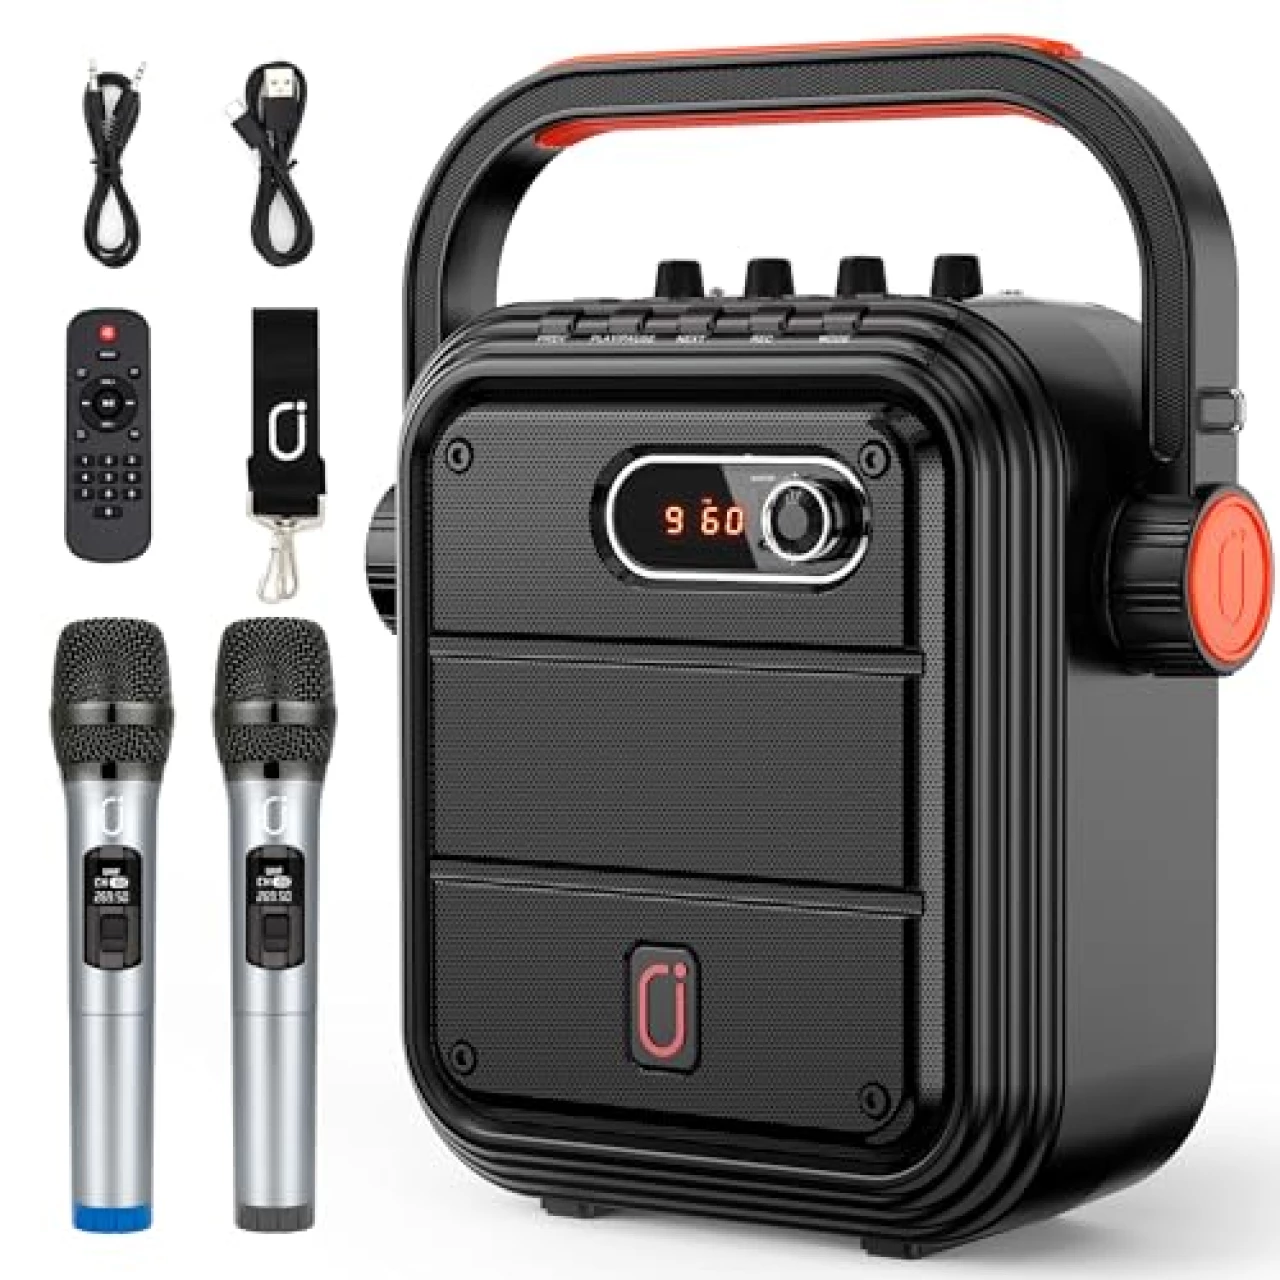 JYX 66BT Karaoke Machine with 2 UHF Wireless Microphones, Portable Bluetooth PA System with Shoulder Strap, Subwoofer Support TWS, Radio, AUX in, REC, Bass&amp;Treble for Party/Meeting/Adults/Kids